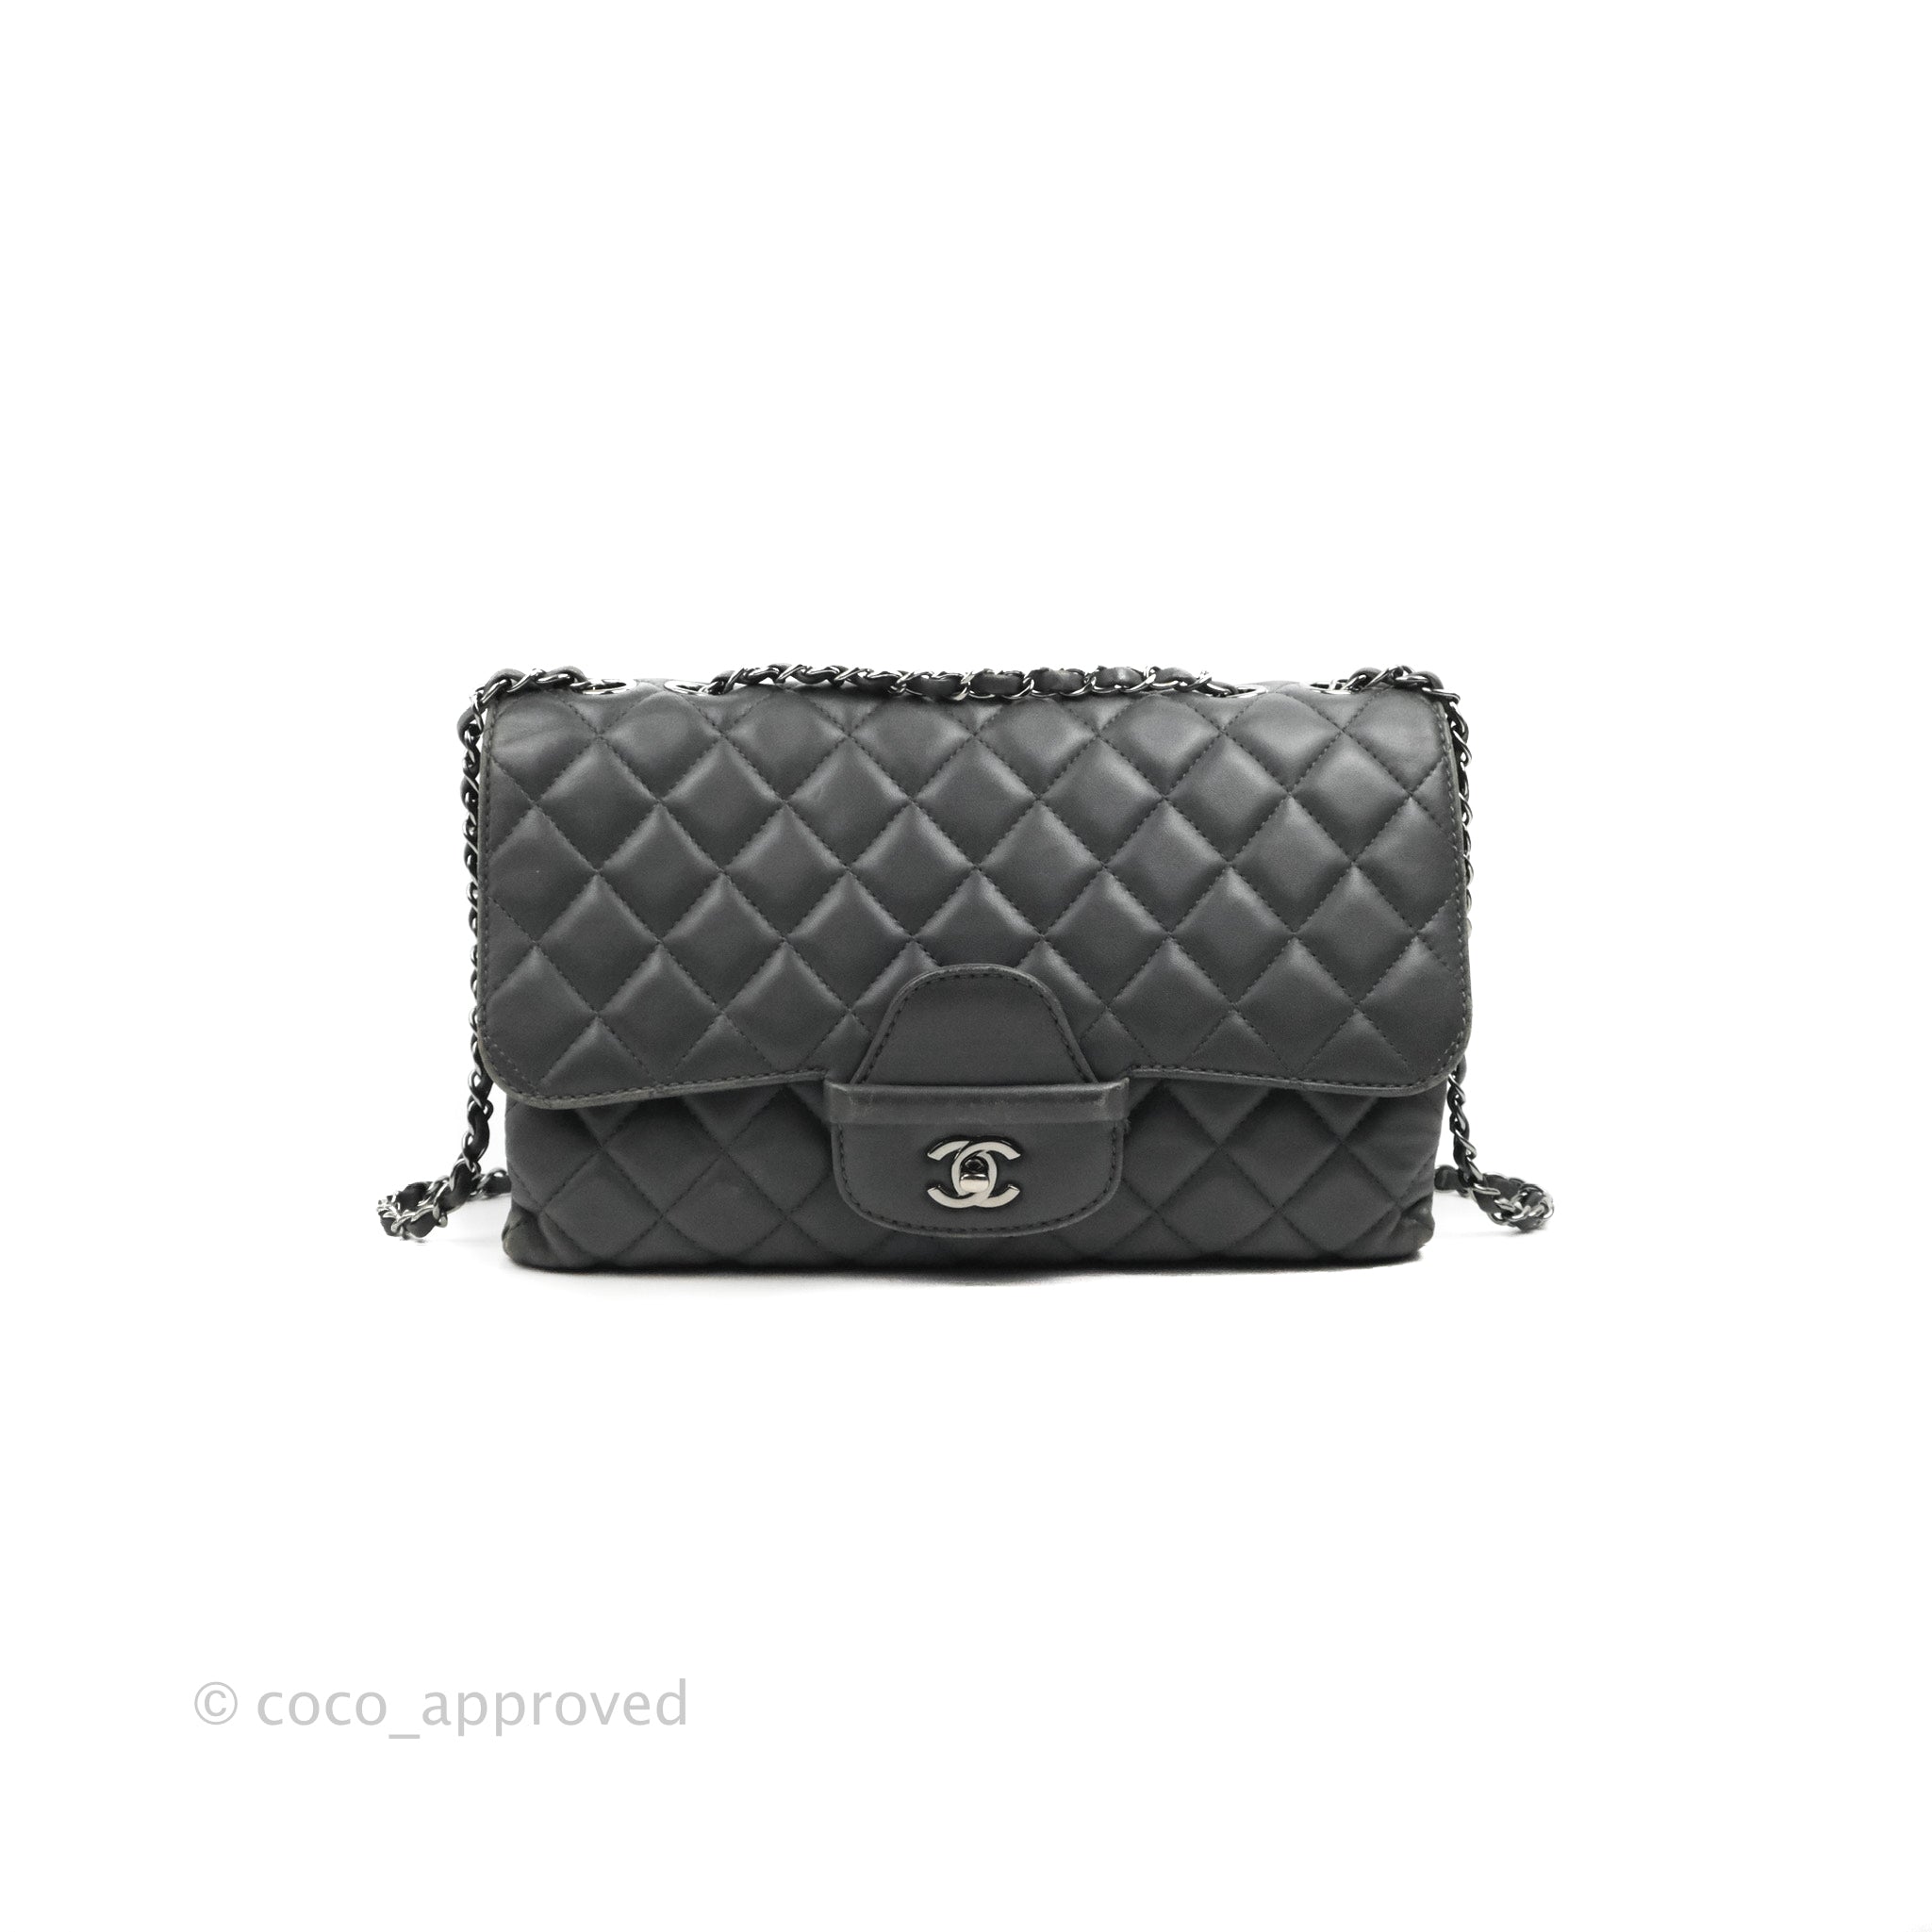 Chanel Grey Quilted Lambskin Leather Top Handle Flap Coin Purse